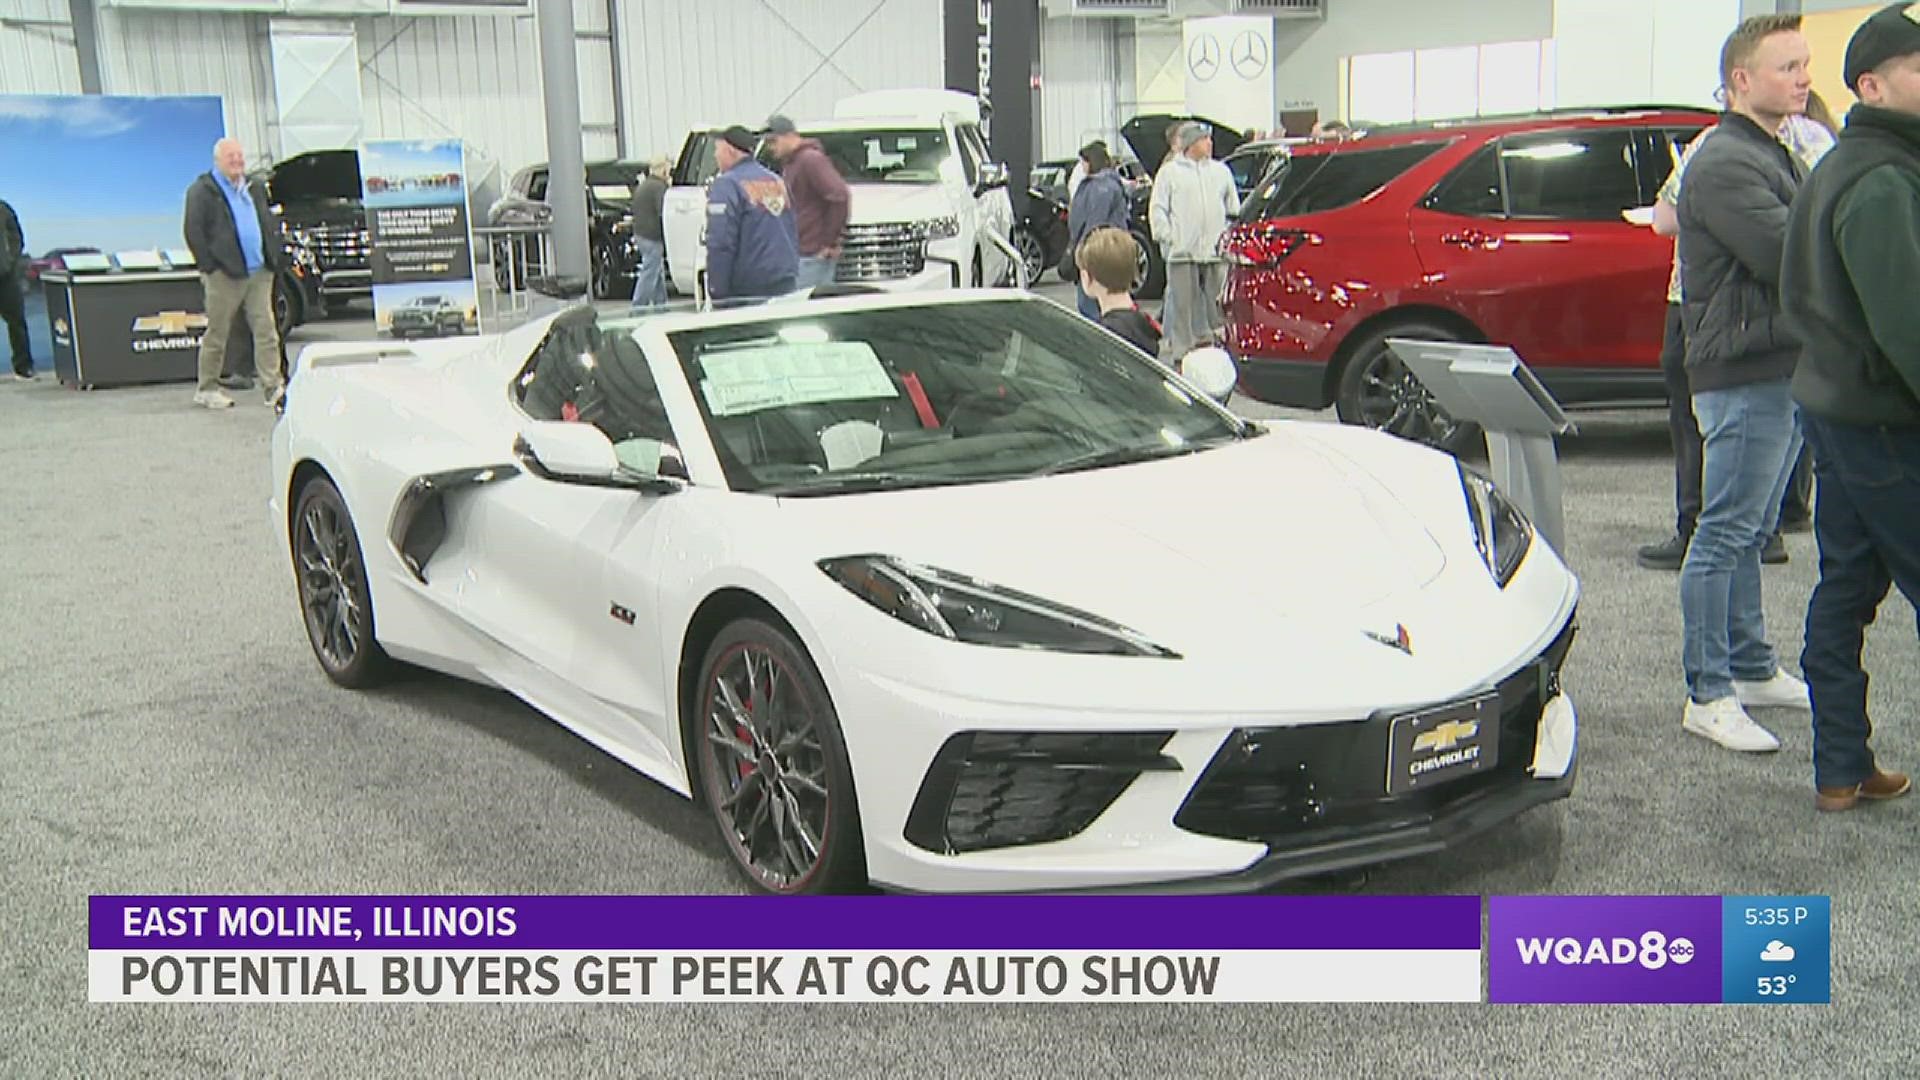 More than 150 vehicles were on display the past three days at the Bend XPO Center in East Moline.